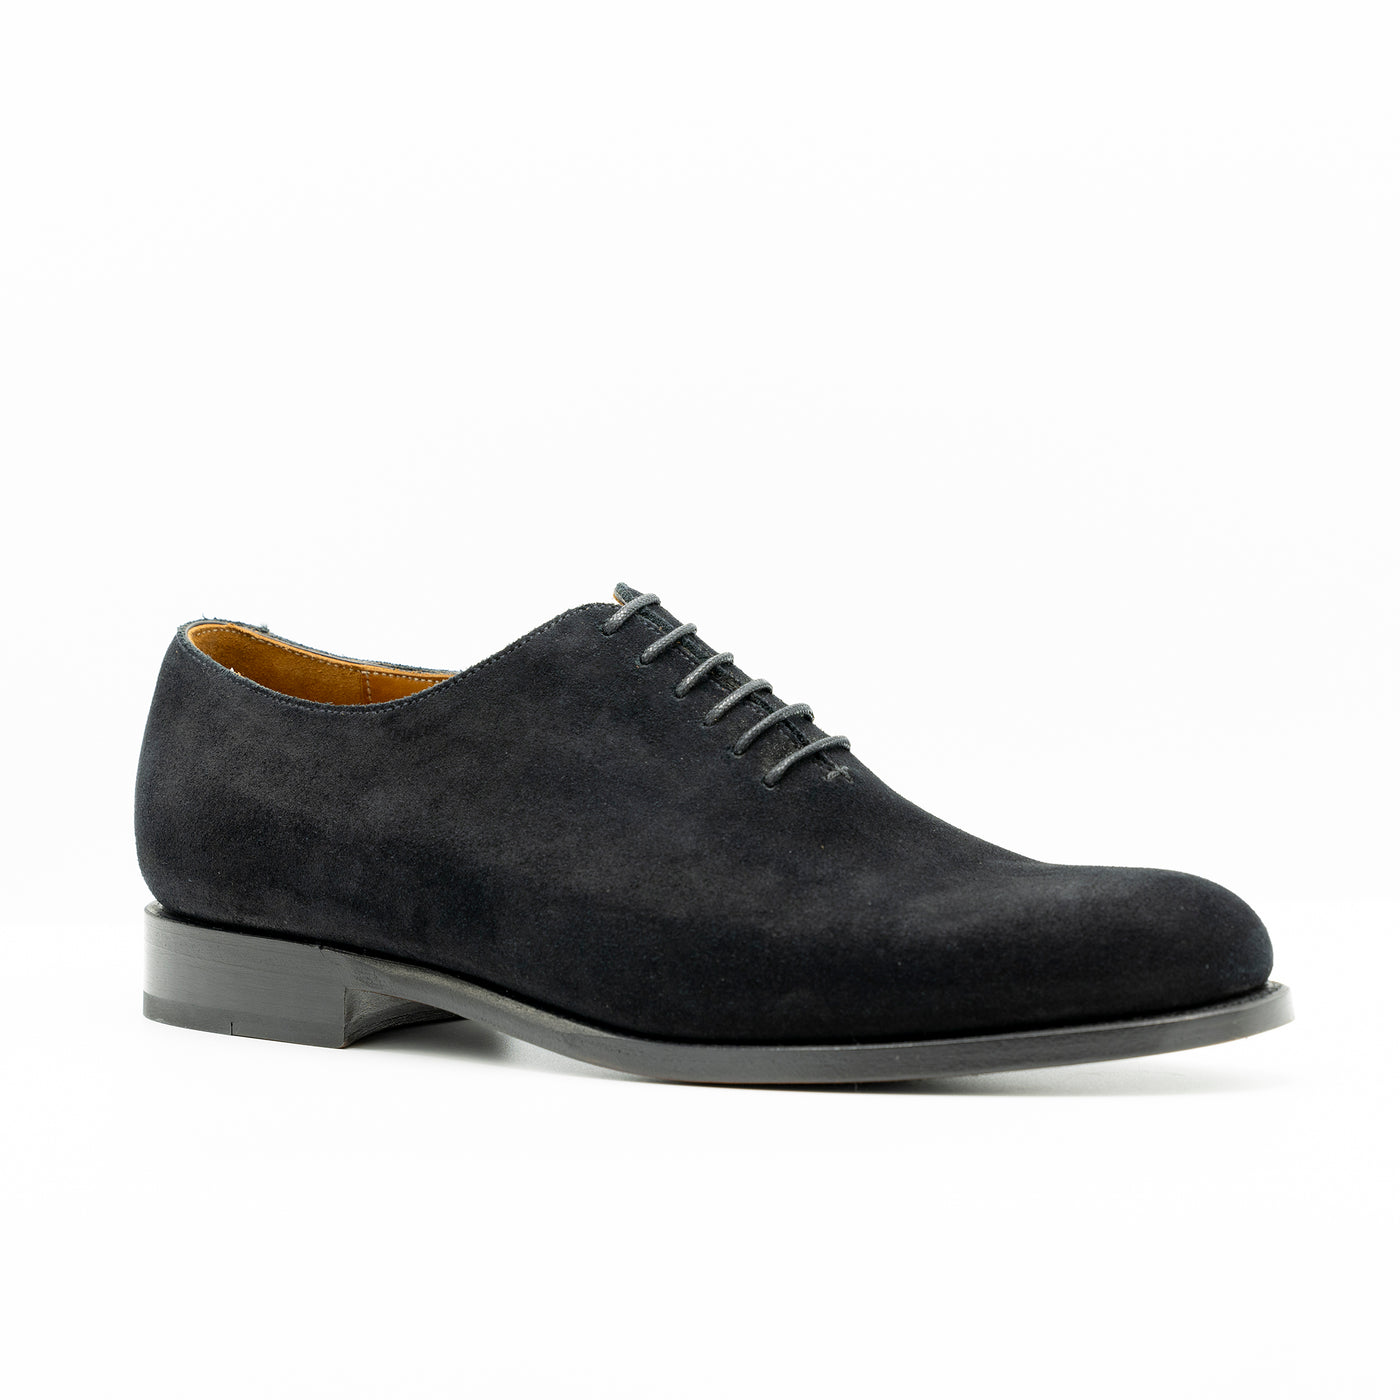 THE PLAIN OXFORD in BLACK SUEDE